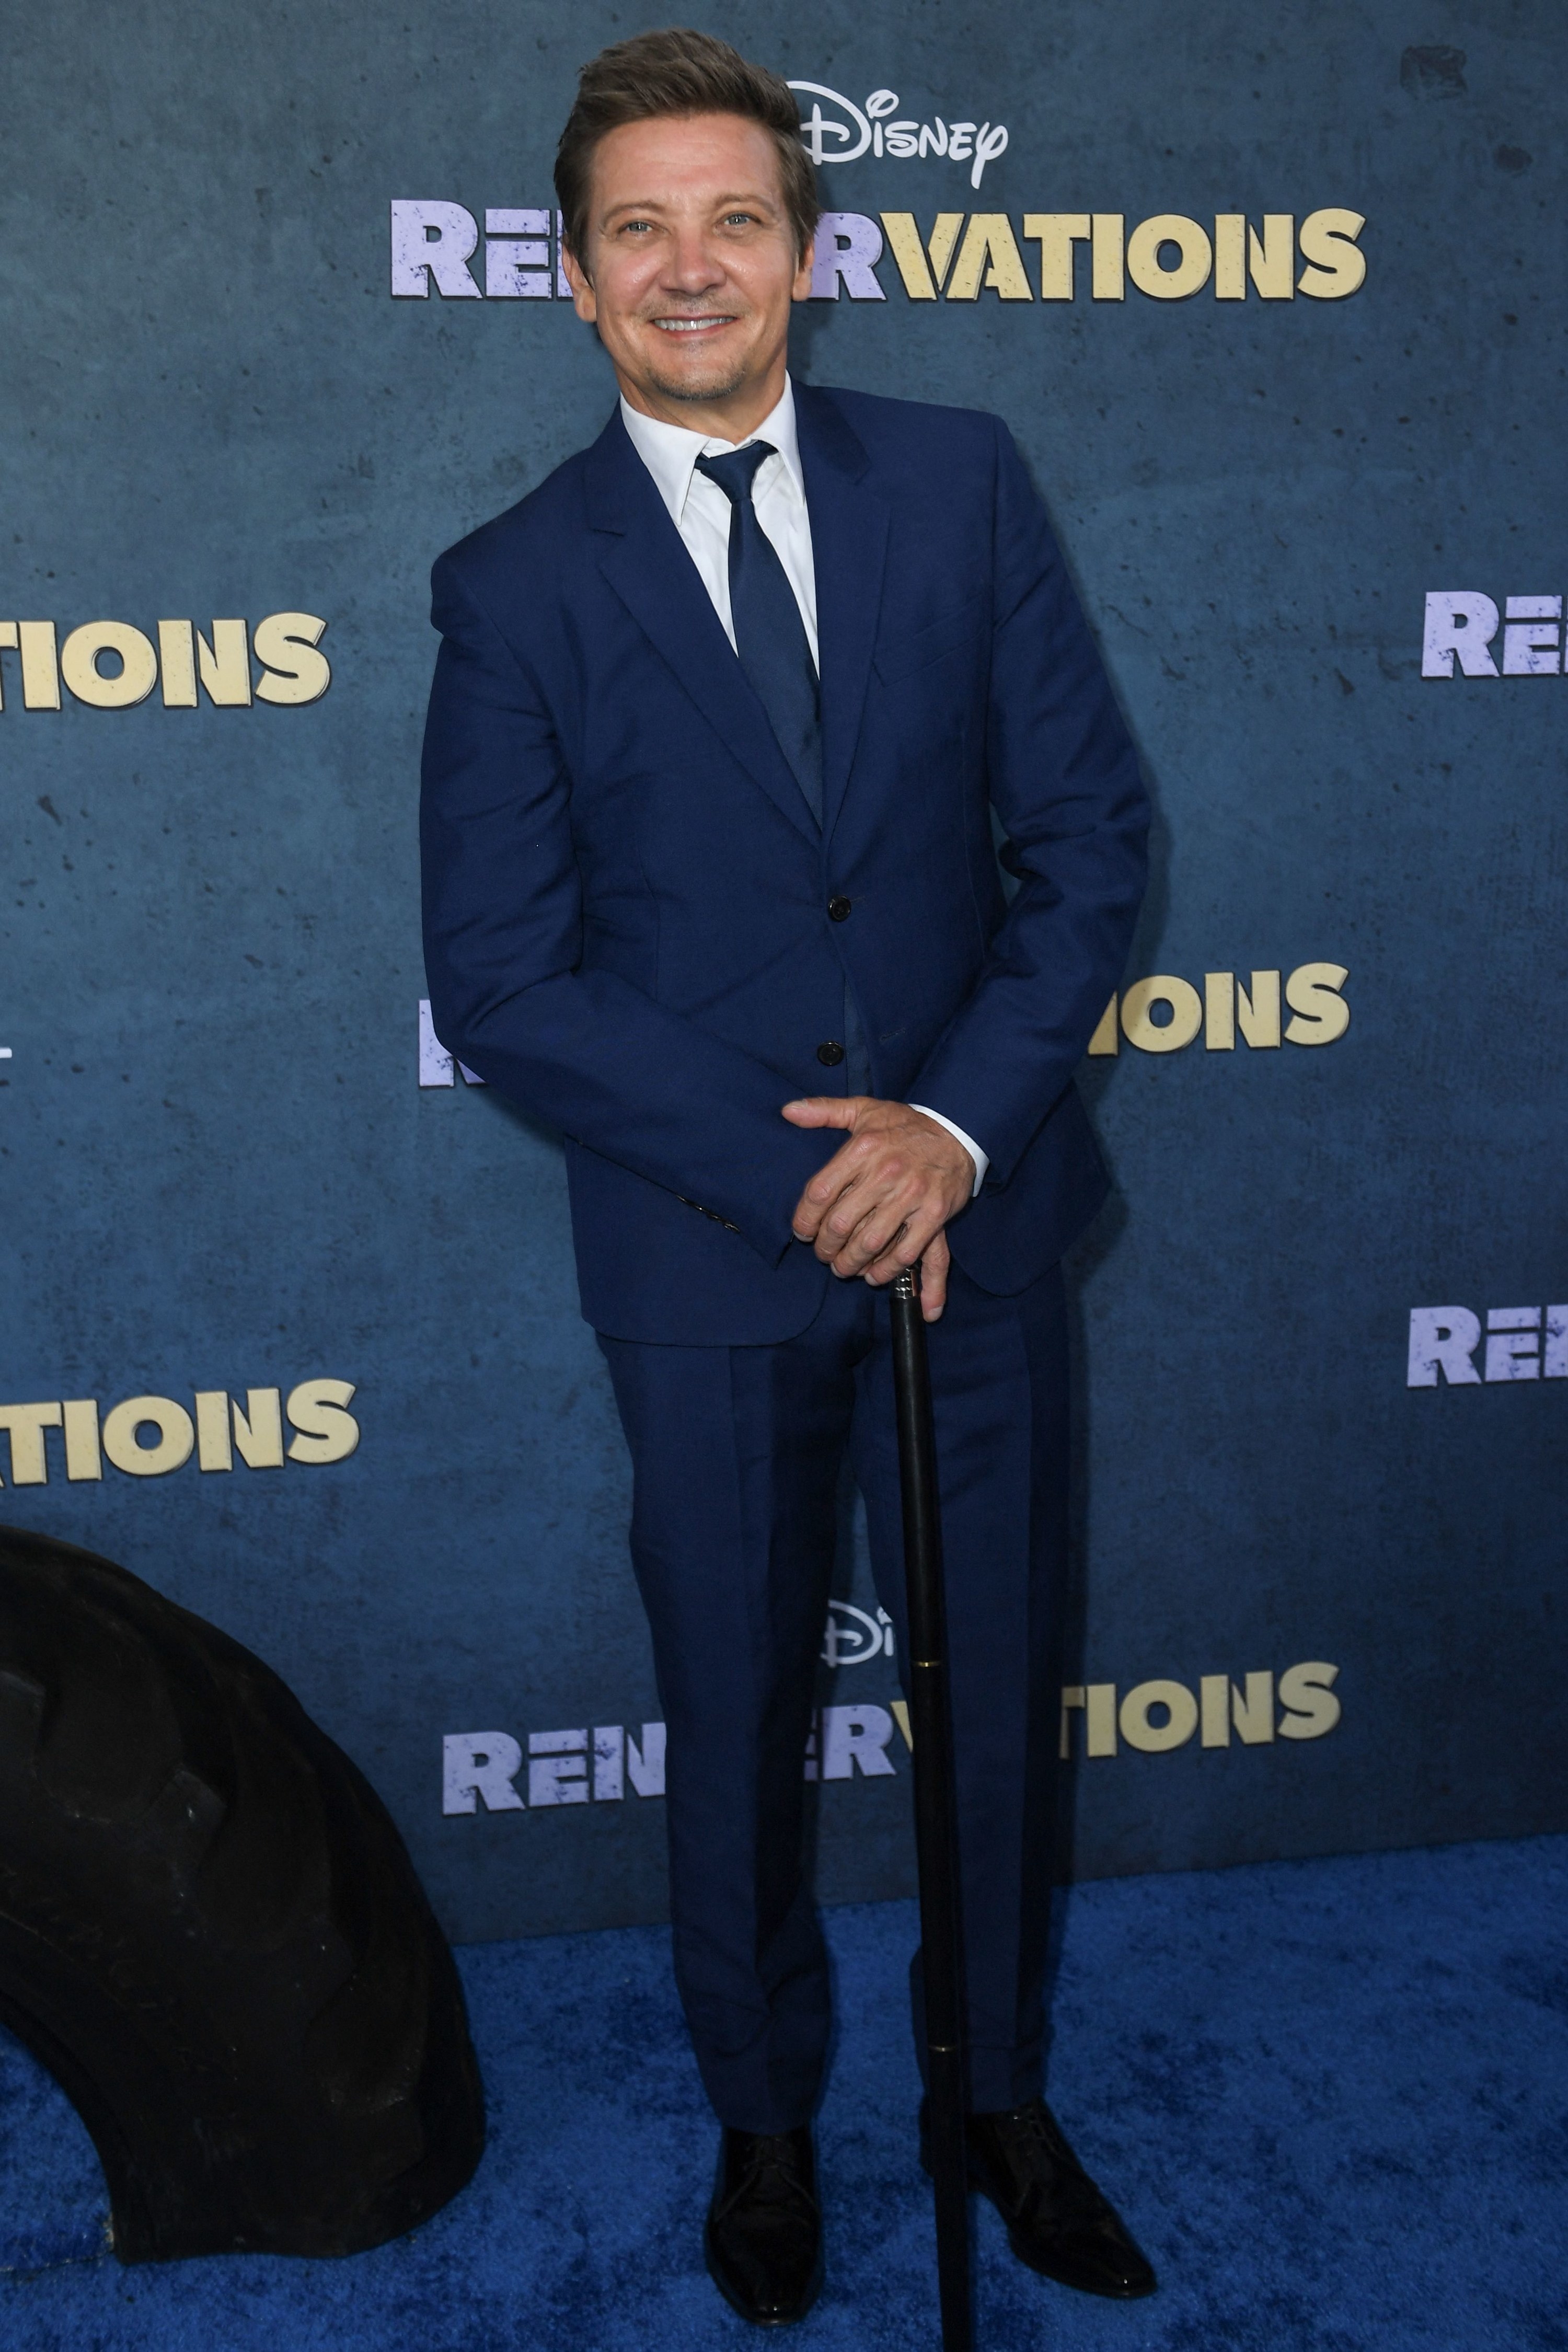 Jeremy smiles on the blue carpet as he holds onto his cane